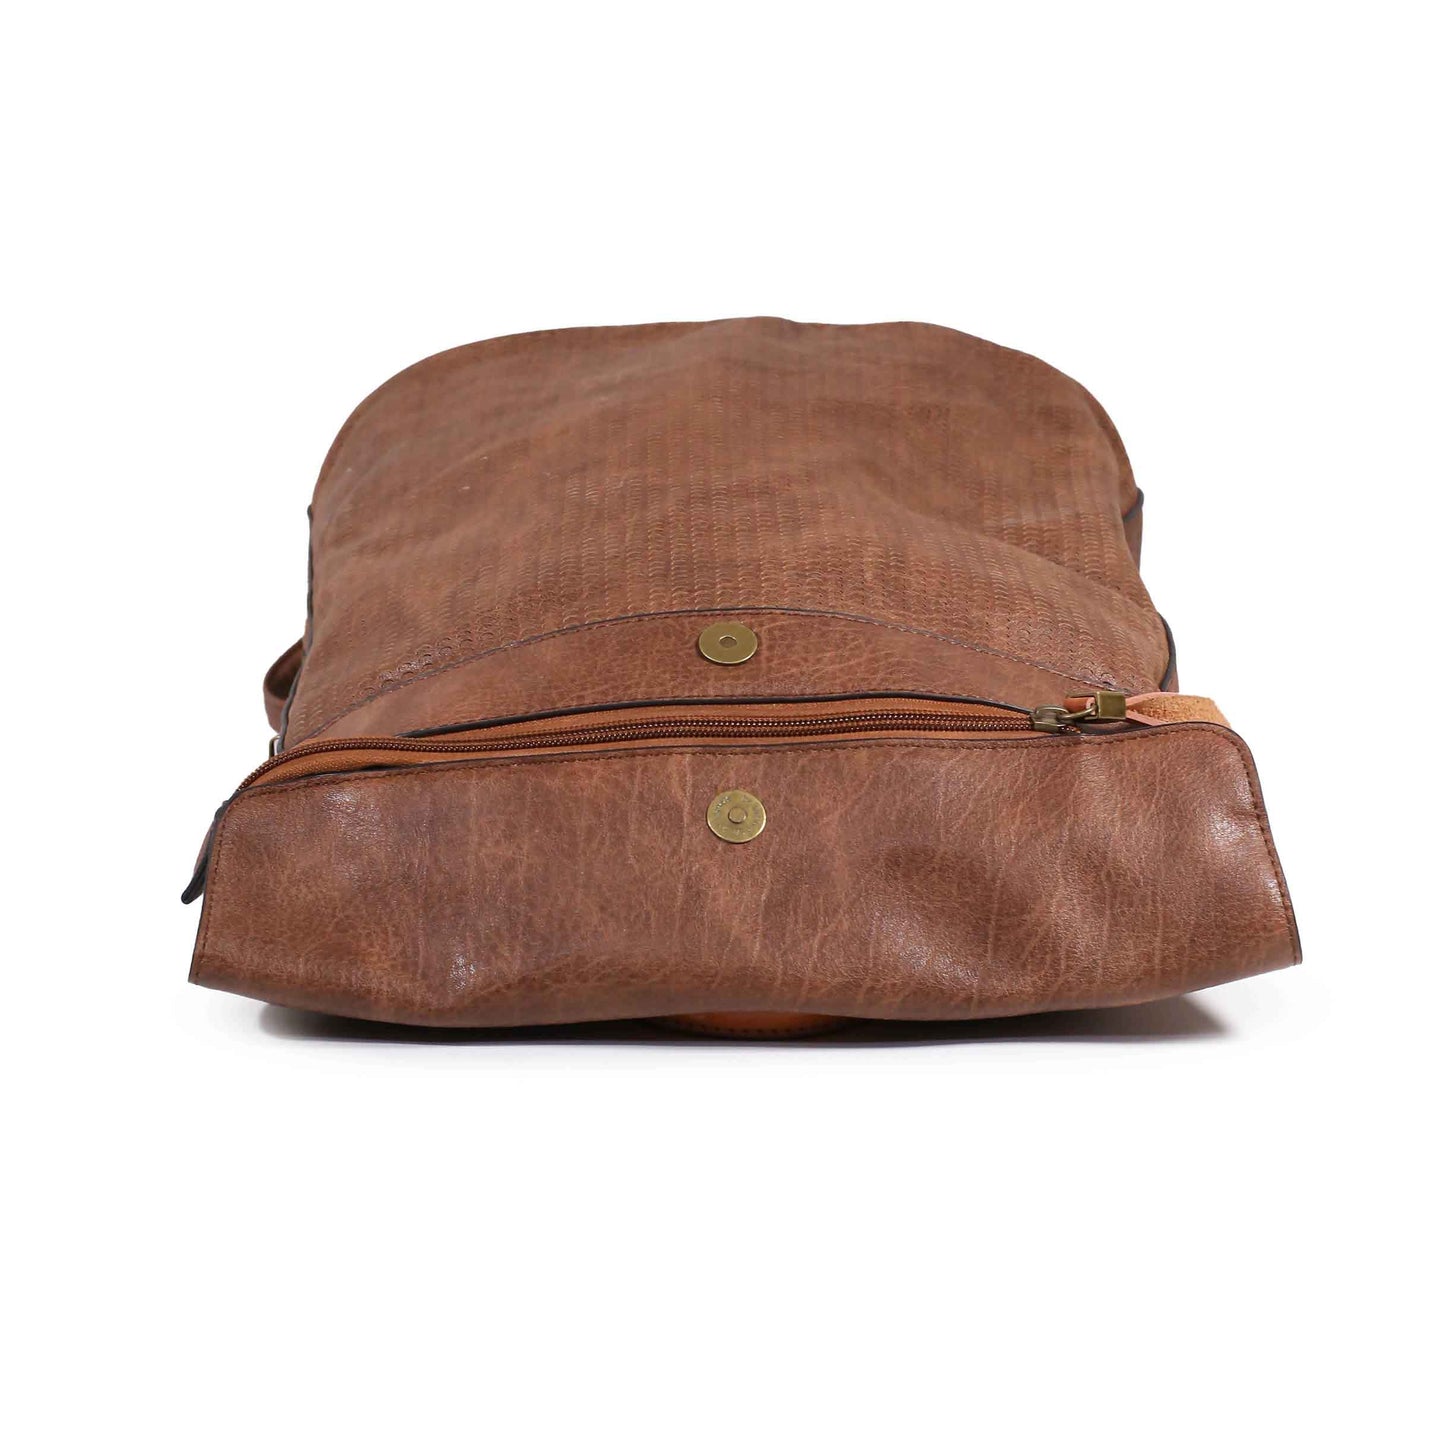 CLASSIC WOMENS BROWN BACKPACK